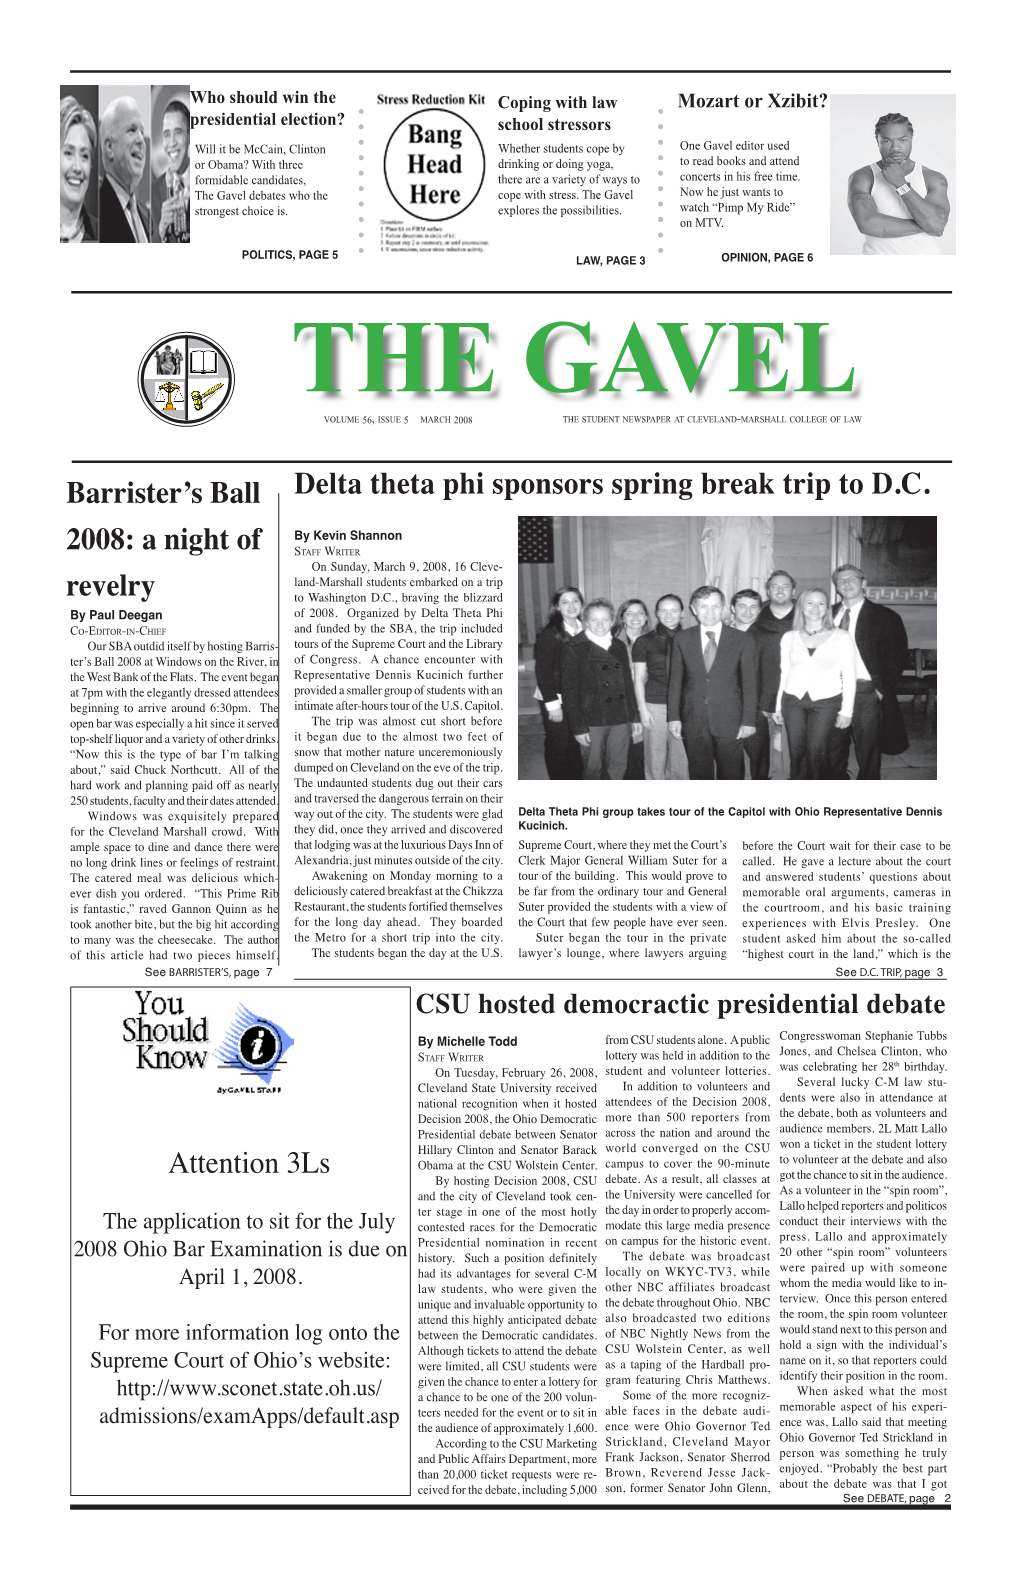 March 2008 the Student Newspaper at Cleveland-Marshall College of Law